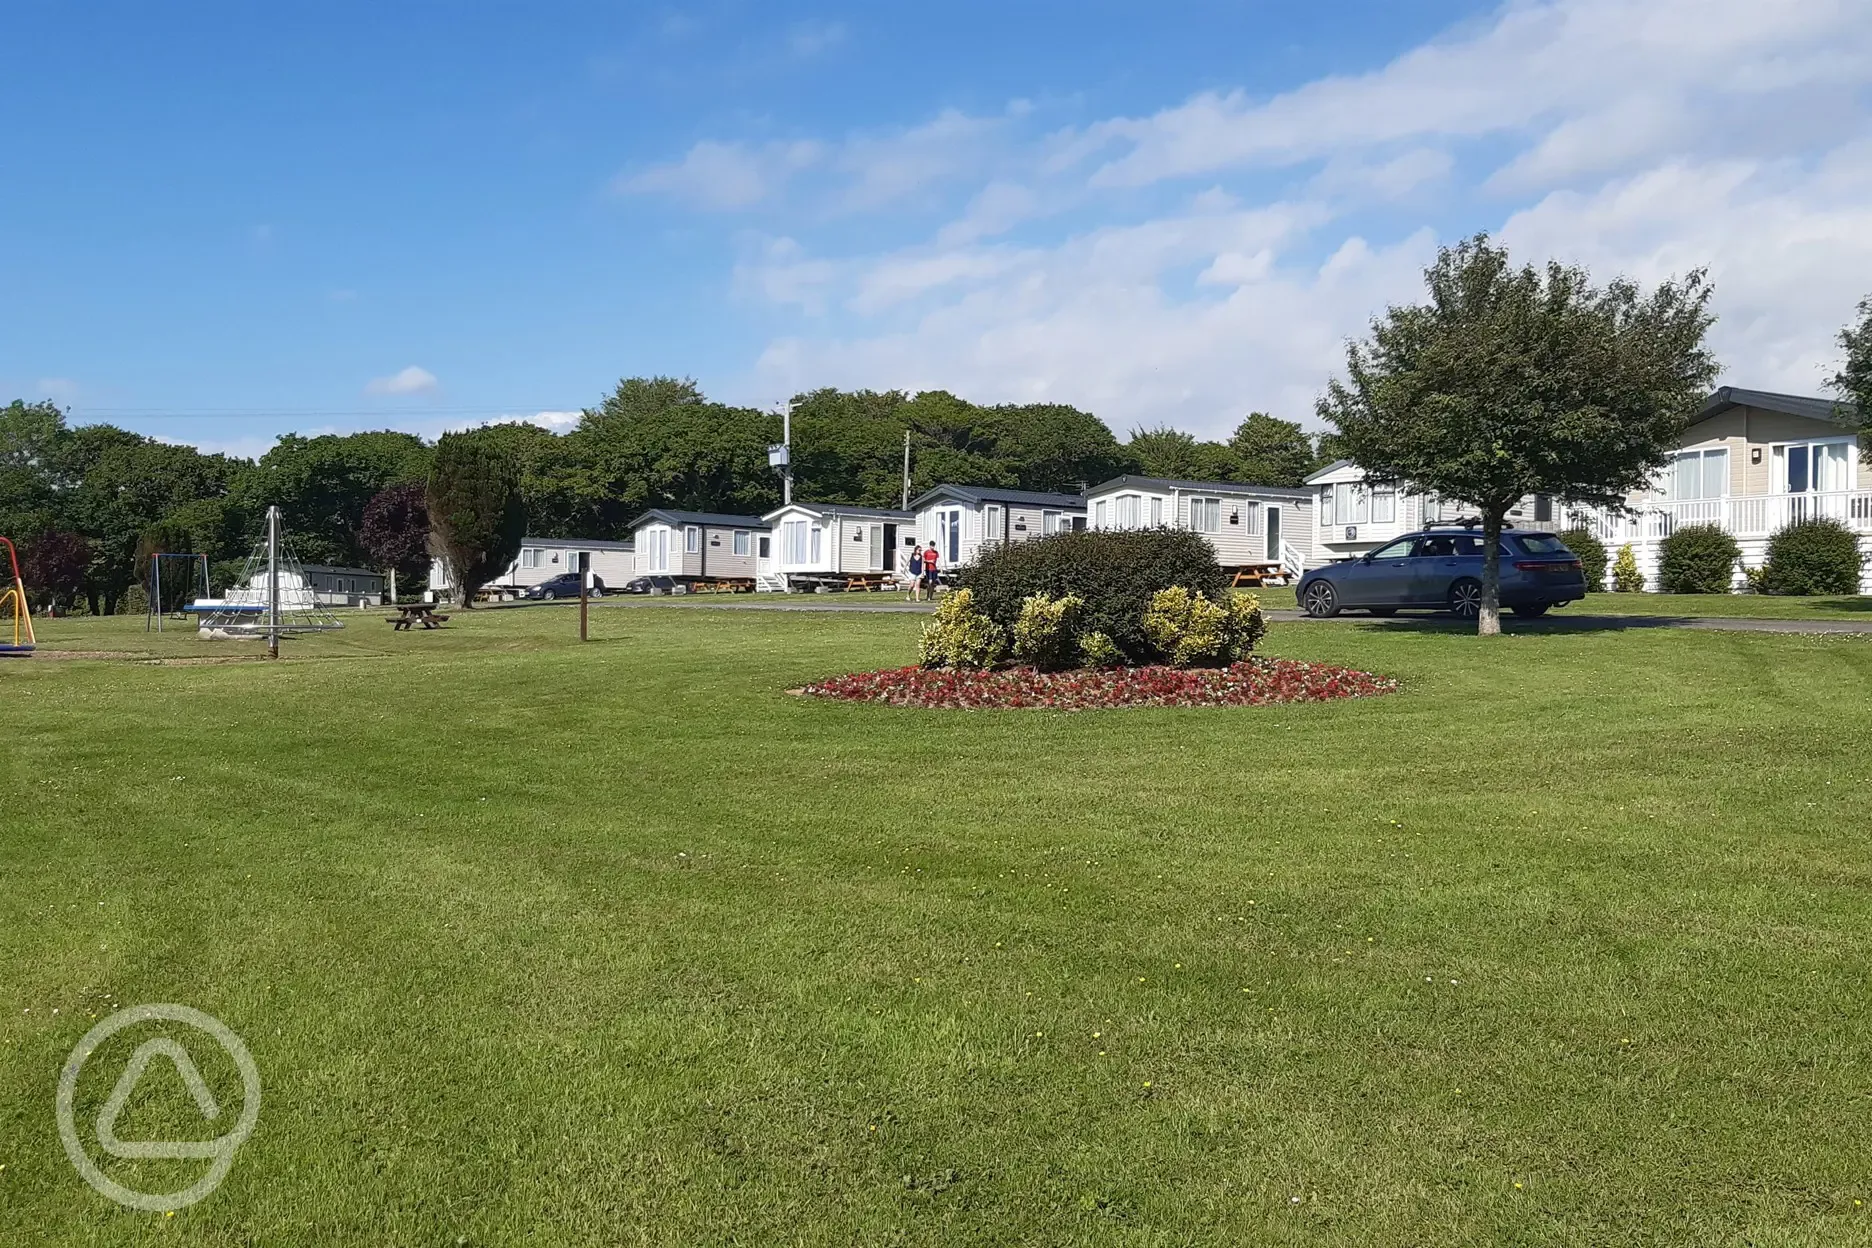 Some of our holiday homes opposite the camping field